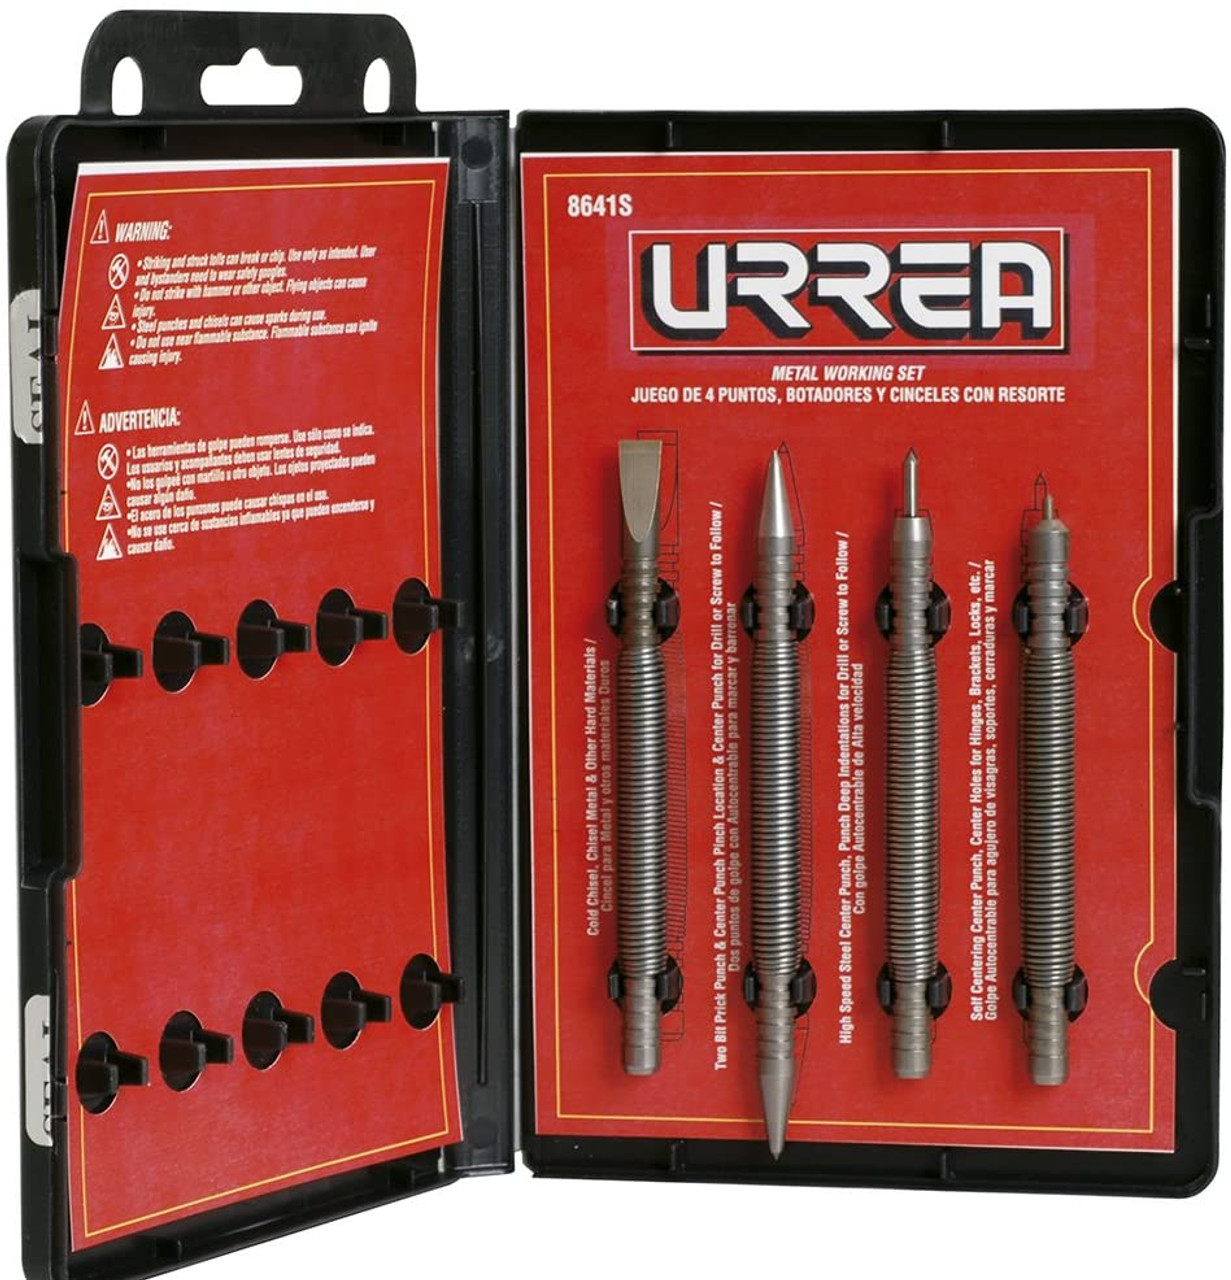 Spring-loaded Chisel And Punch Set 4 Pieces 8641S